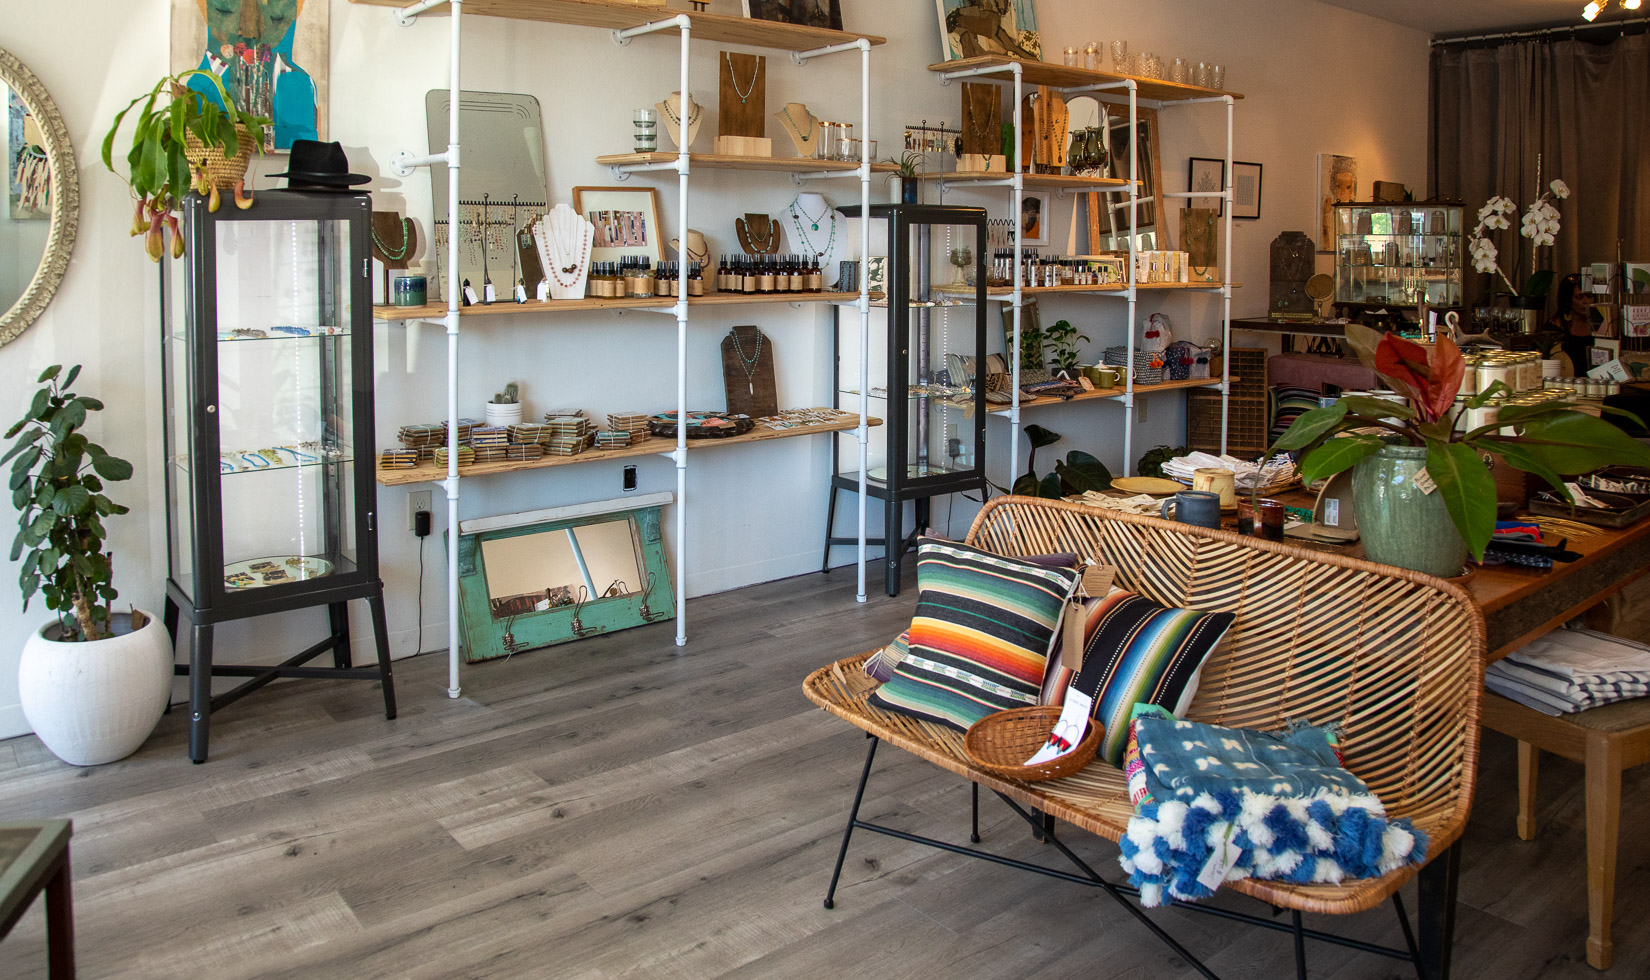 A view of the selection of items available at the new Jam Jar Boutique in downtown Healdsburg